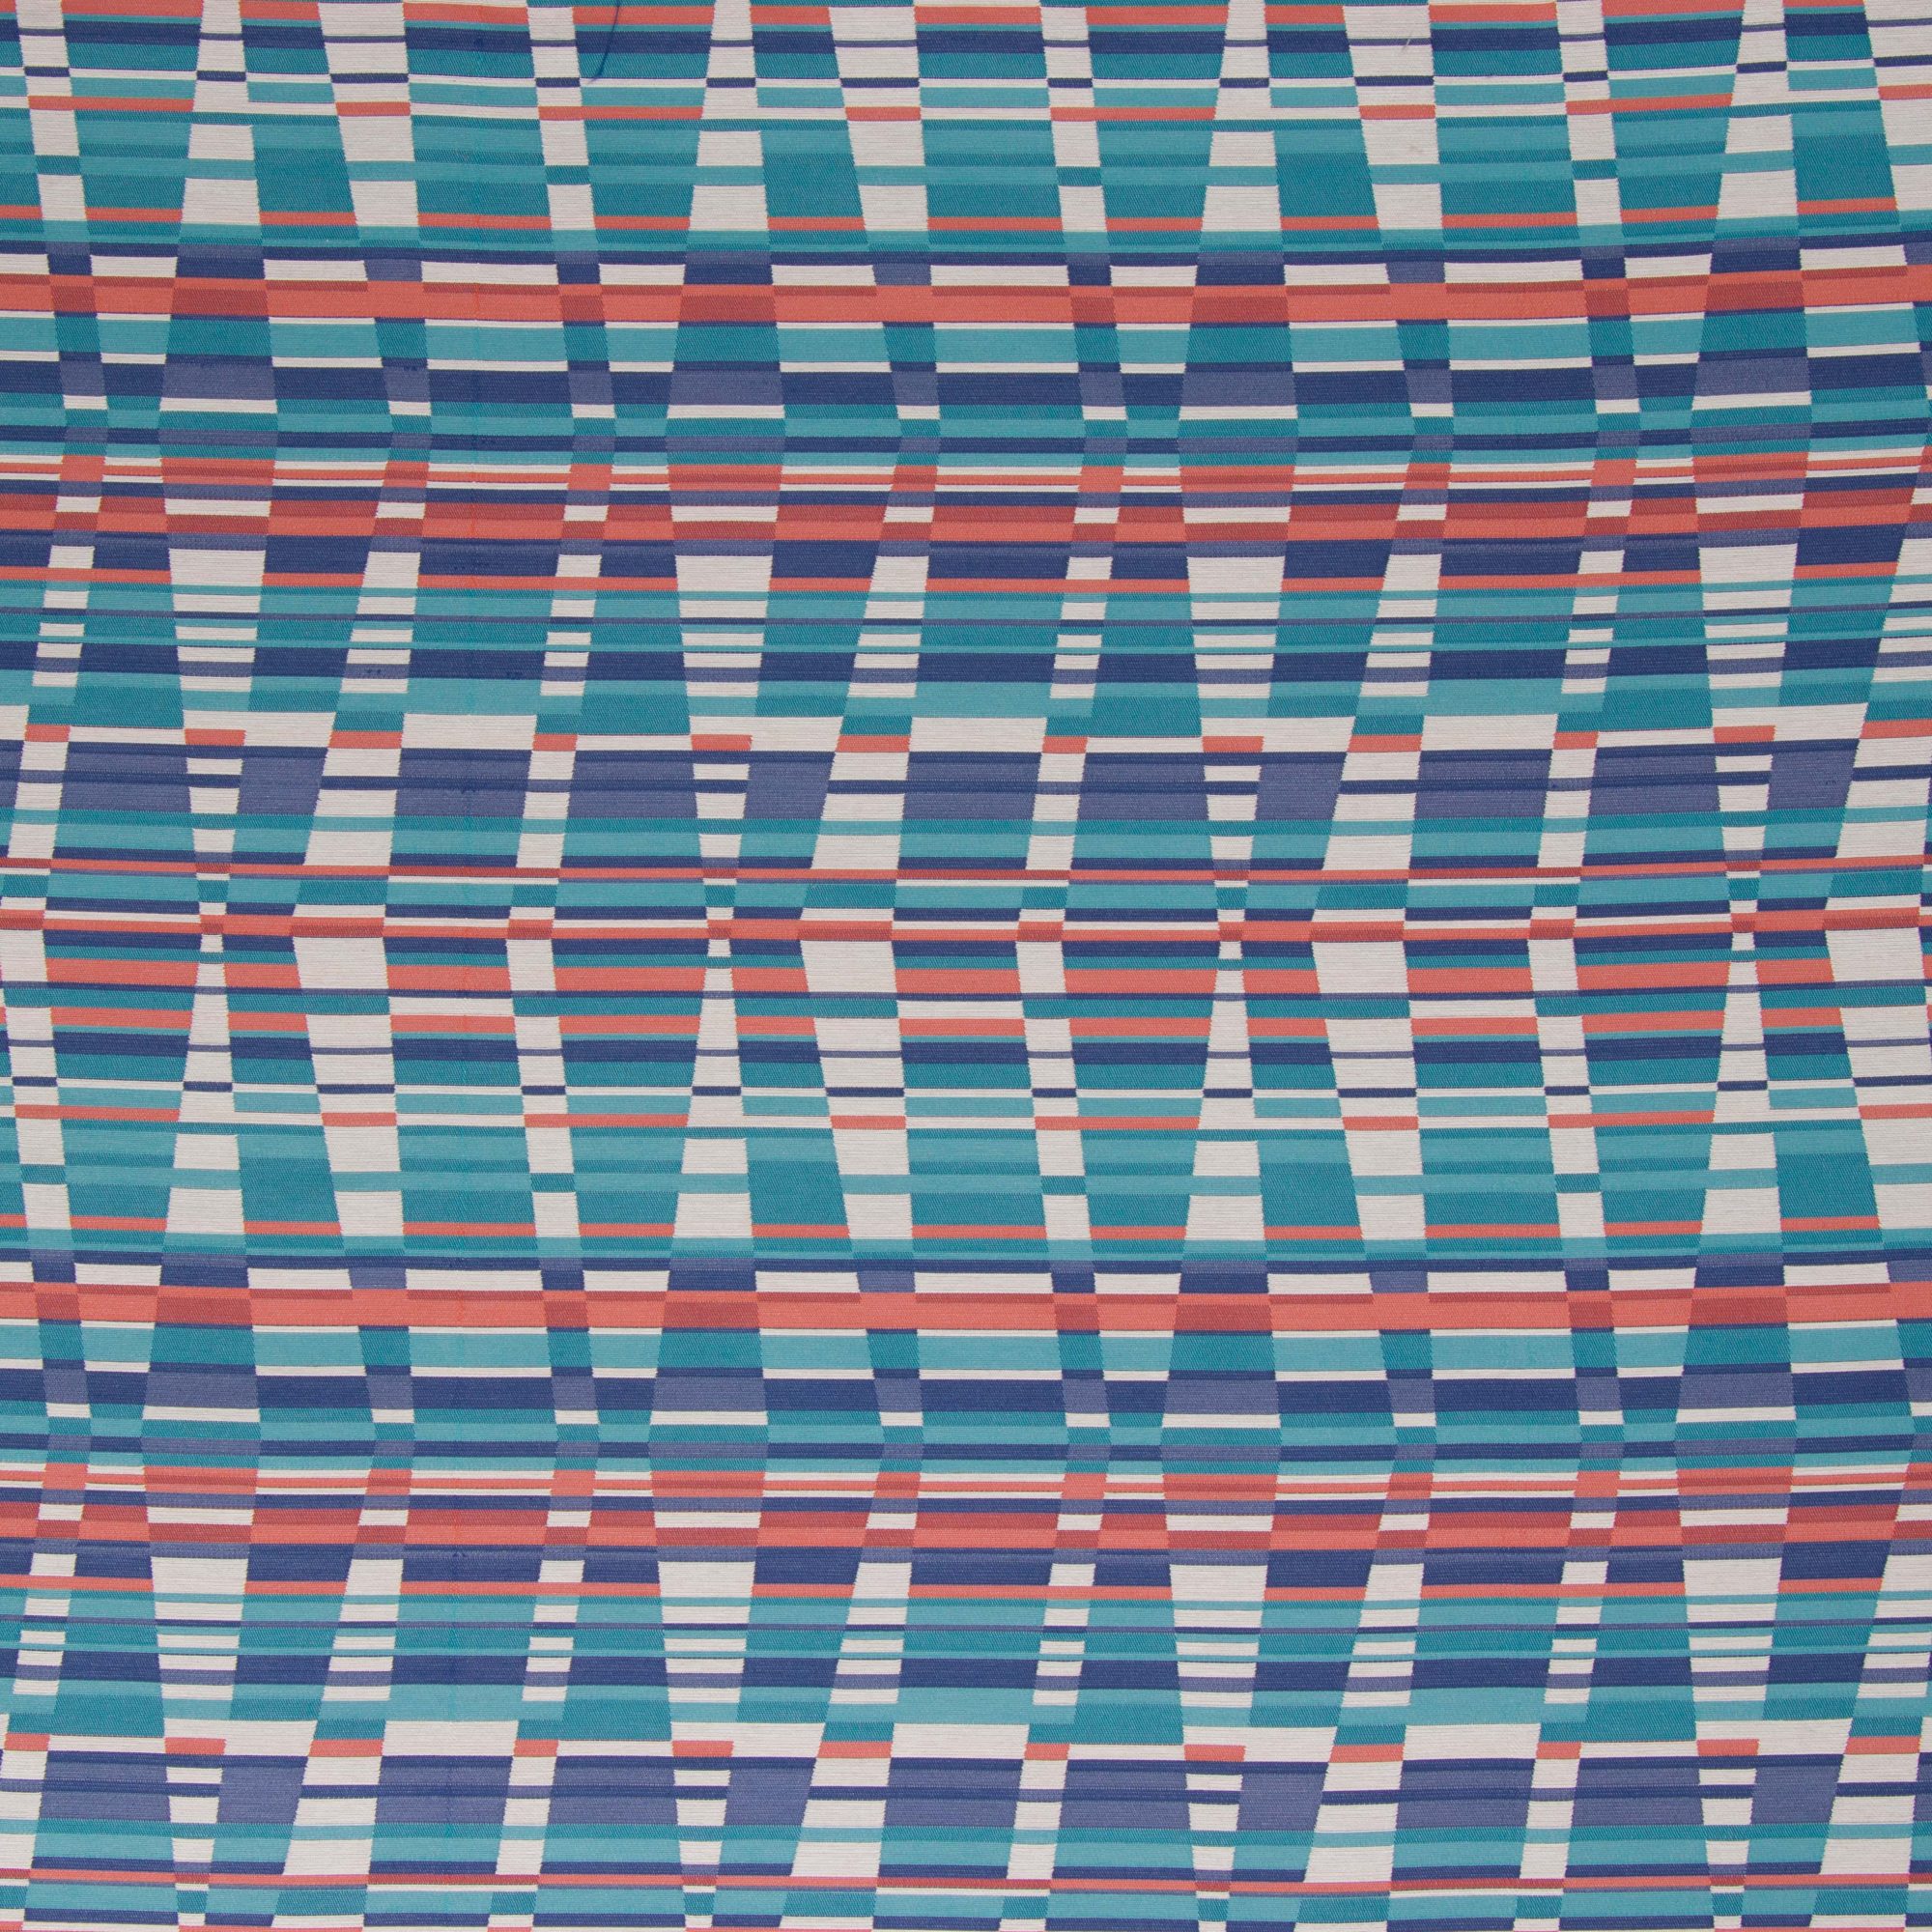 Bella Dura and Bella Dura Home cut yardage fabric in the pattern Thirasia and color Fiesta.